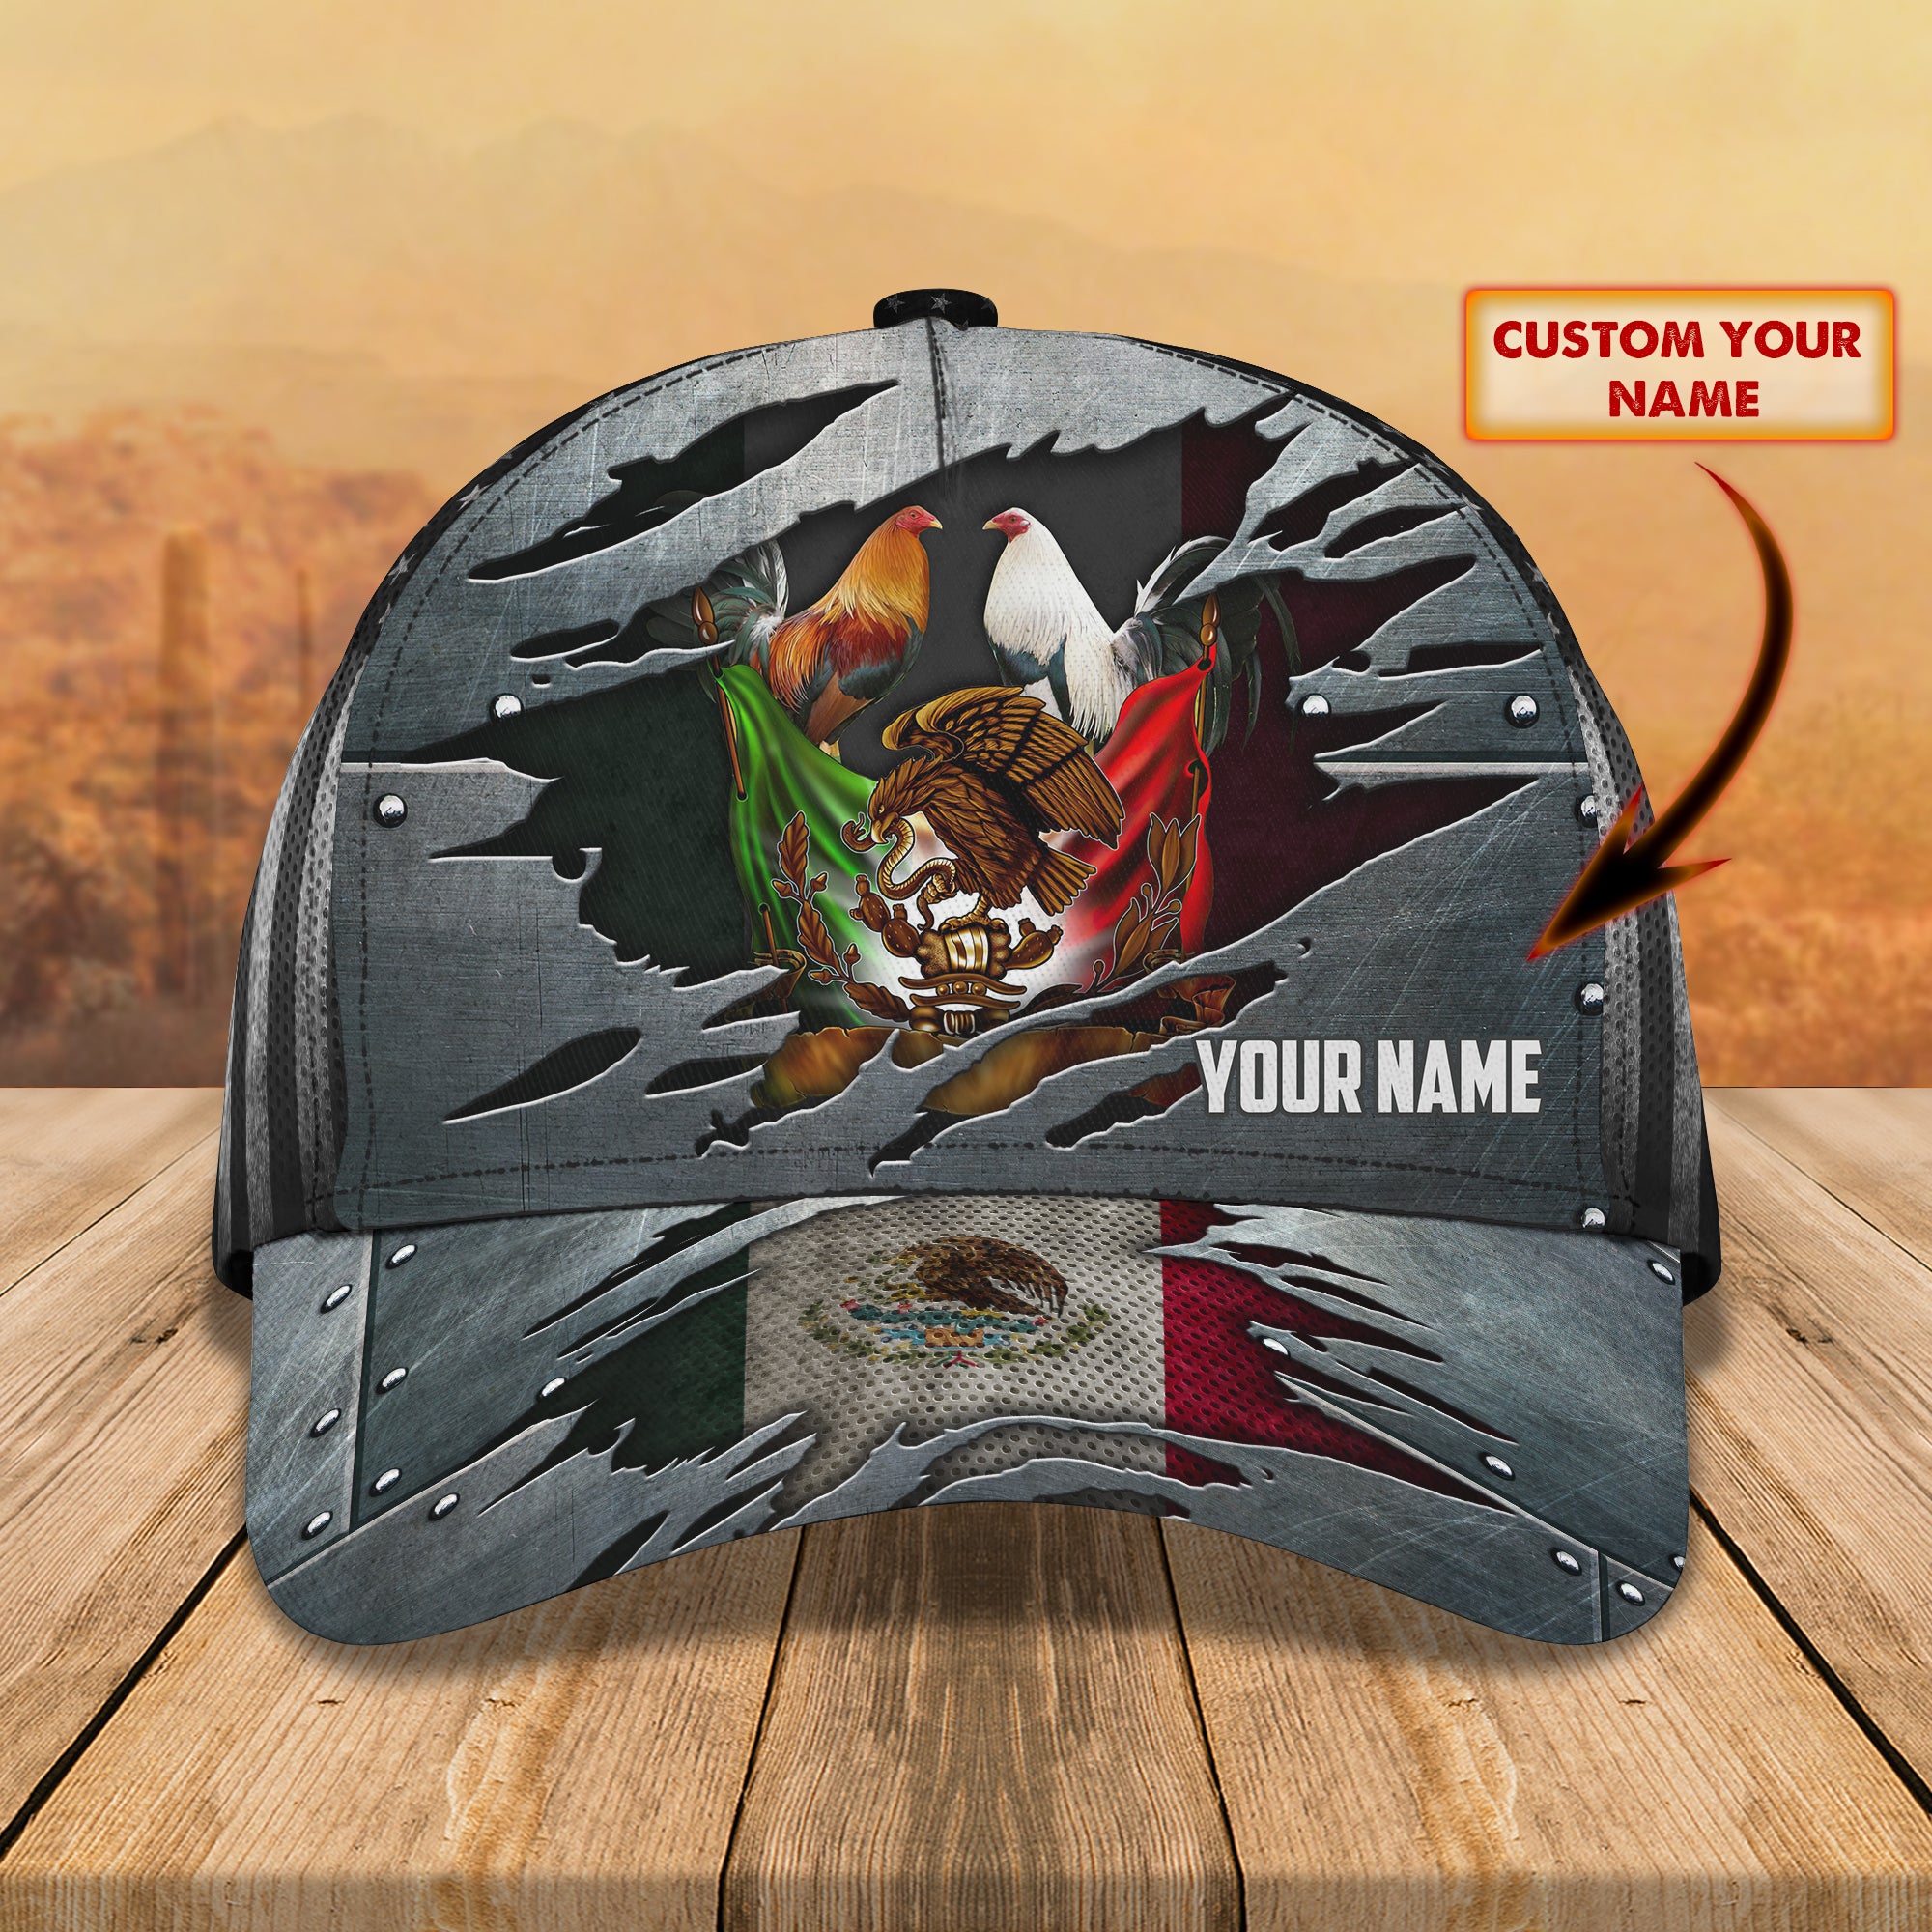 Chicken fight - Personalized Name Cap - Lst149